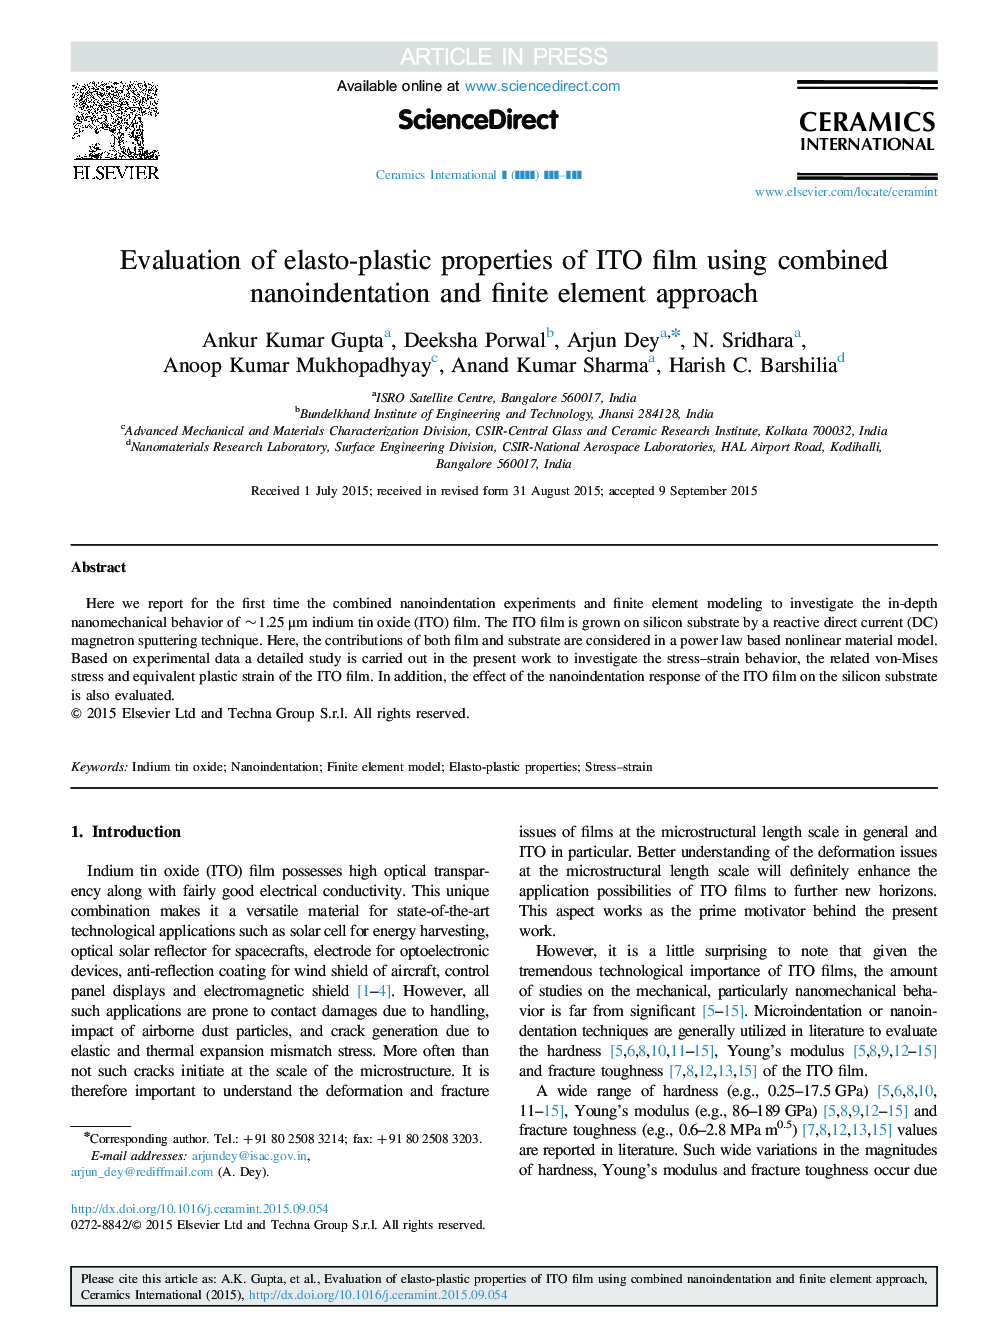 Evaluation of elasto-plastic properties of ITO film using combined nanoindentation and finite element approach